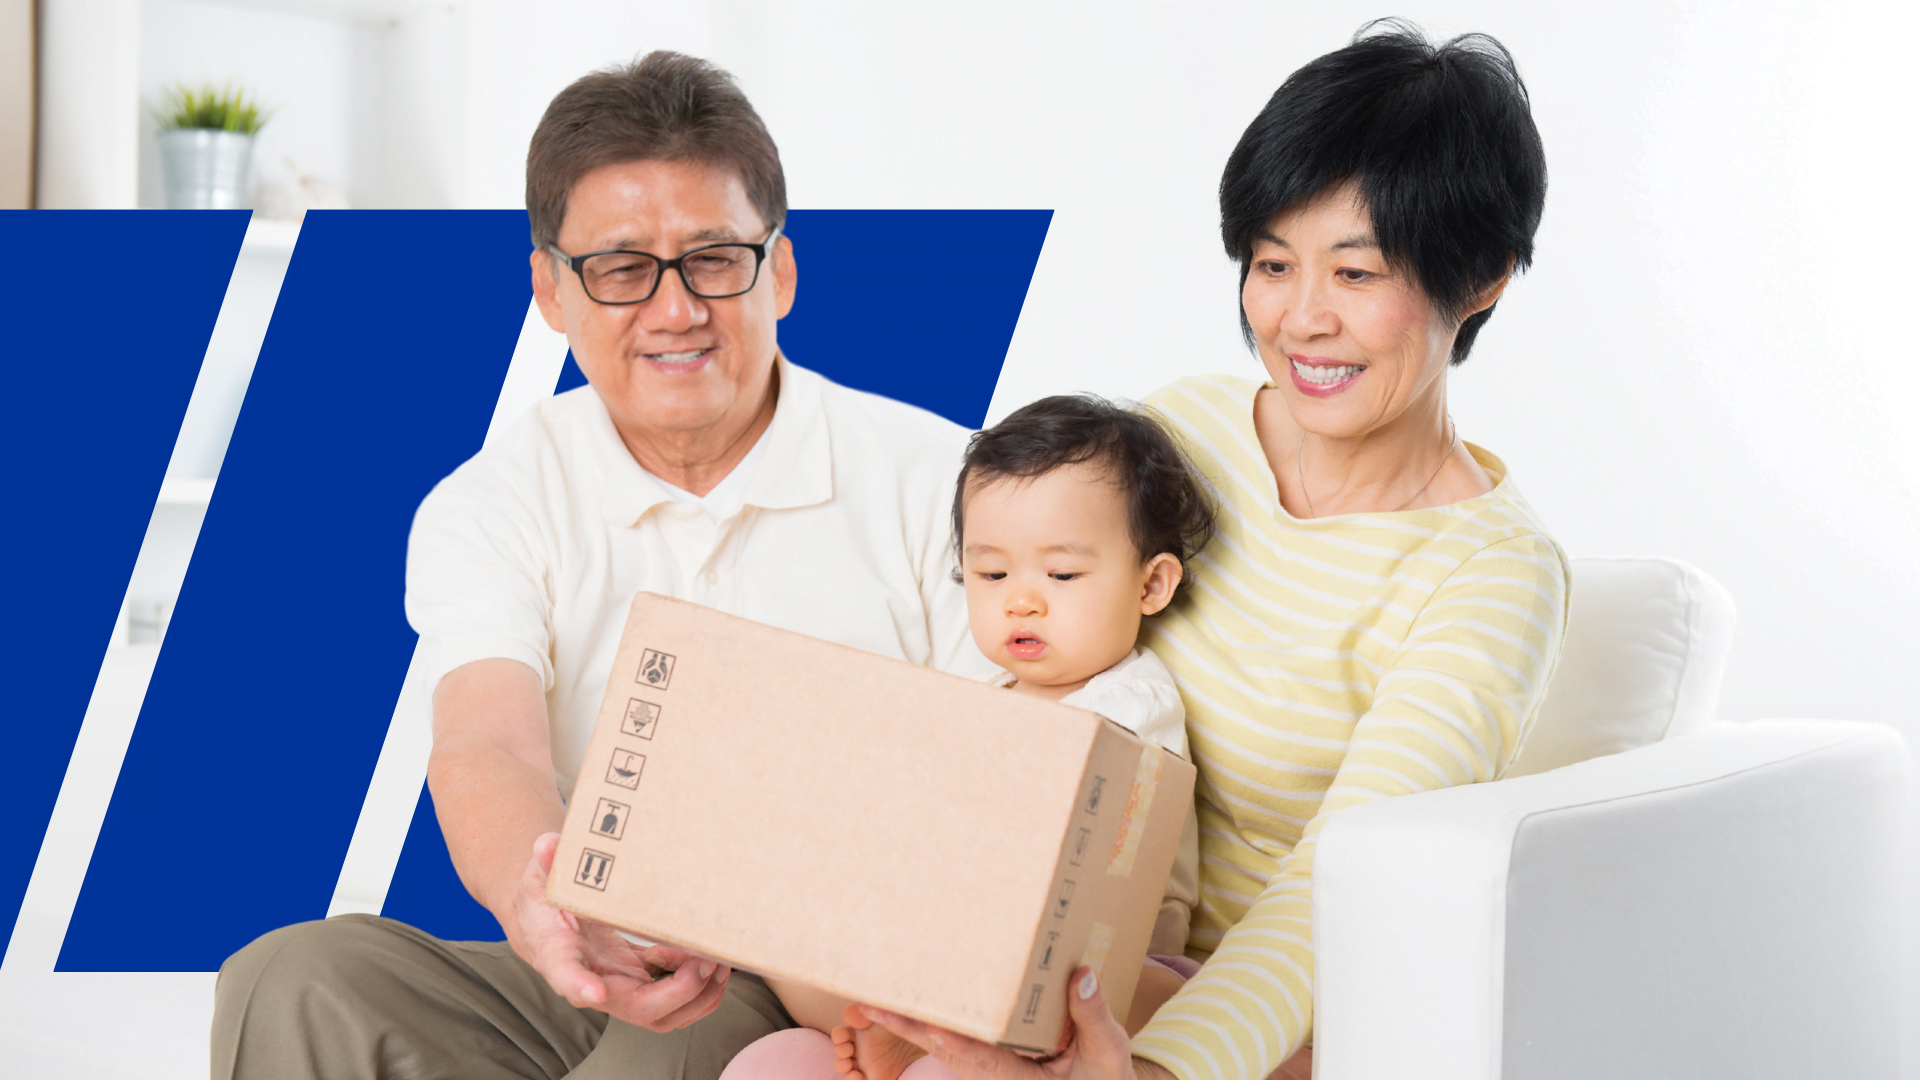 A family receiving a package via local shipping